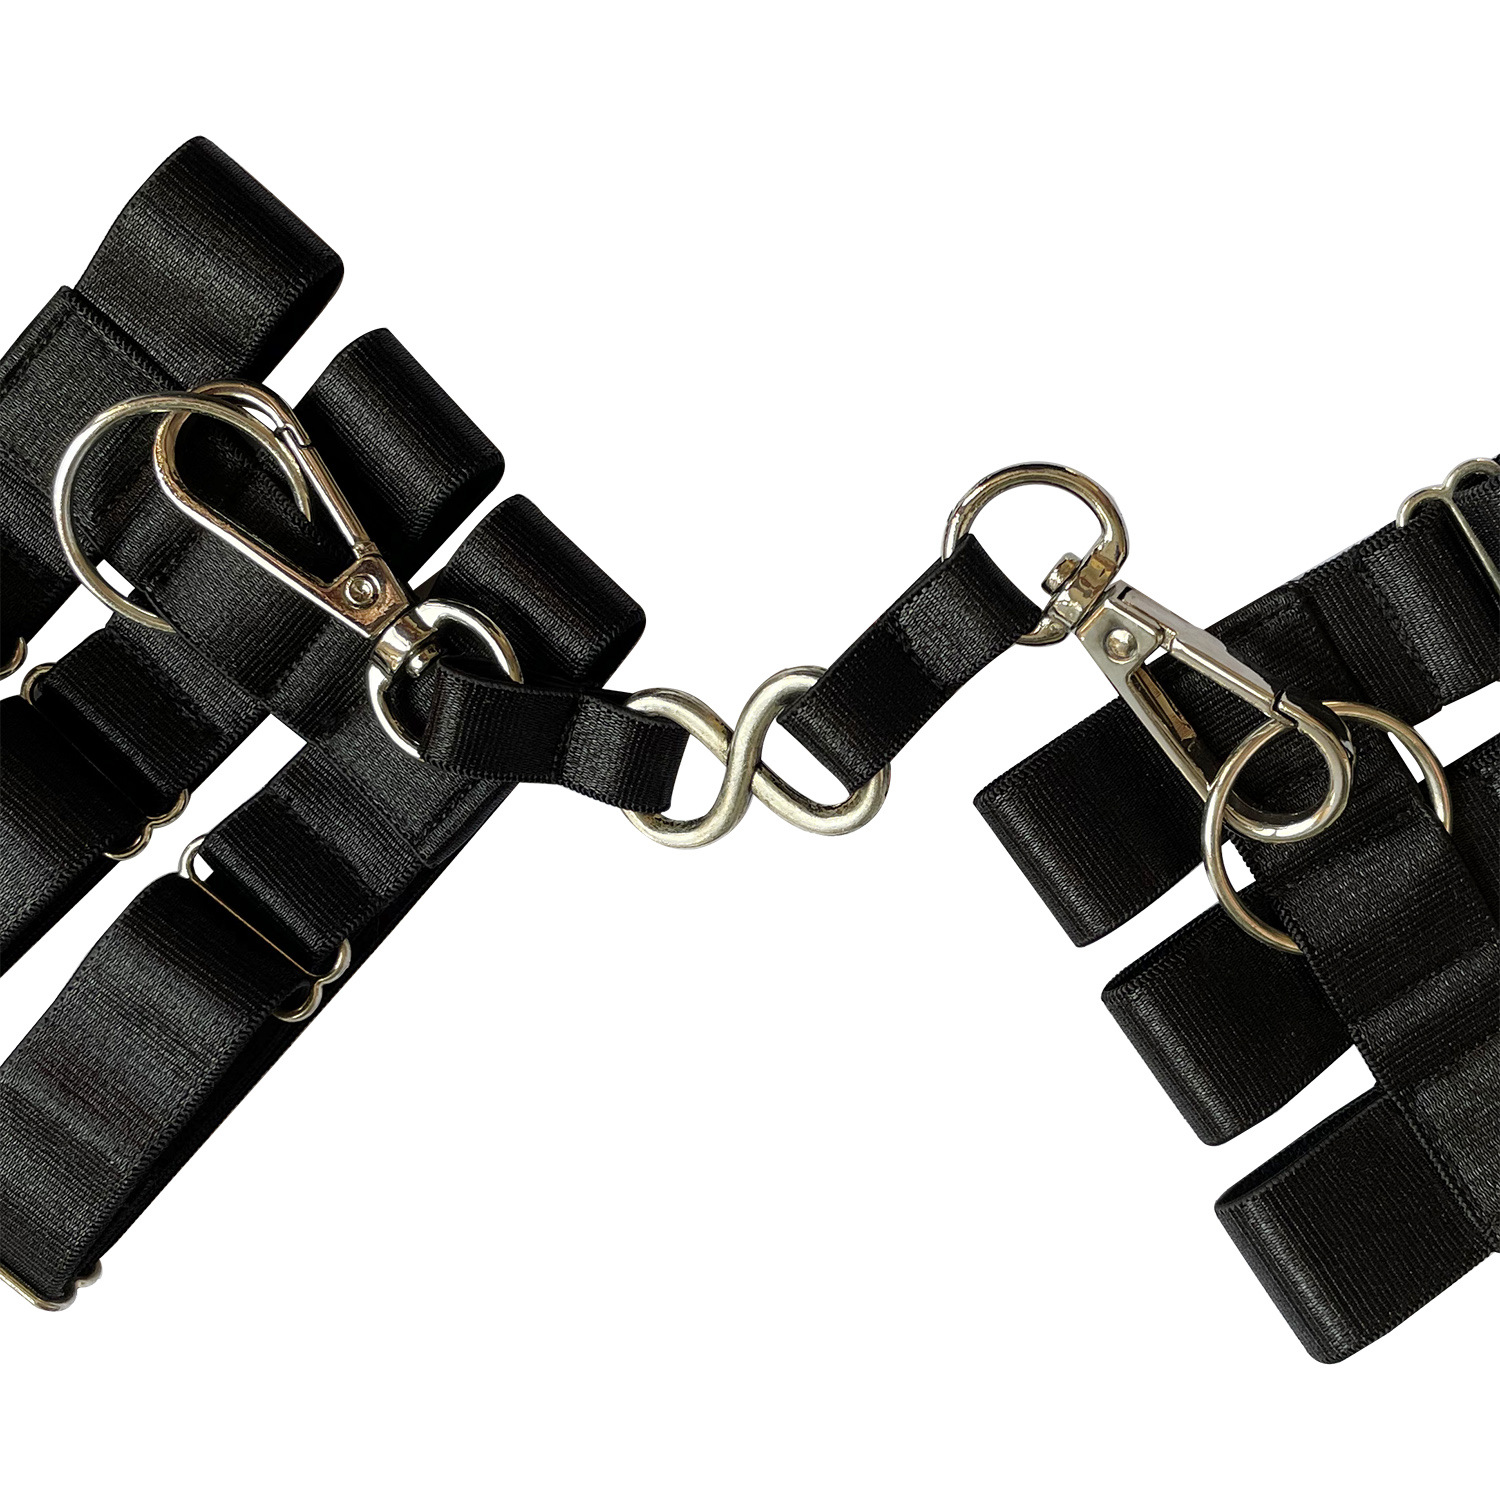 O0880-Sex accessories role-playing adult equipment black handcuffs